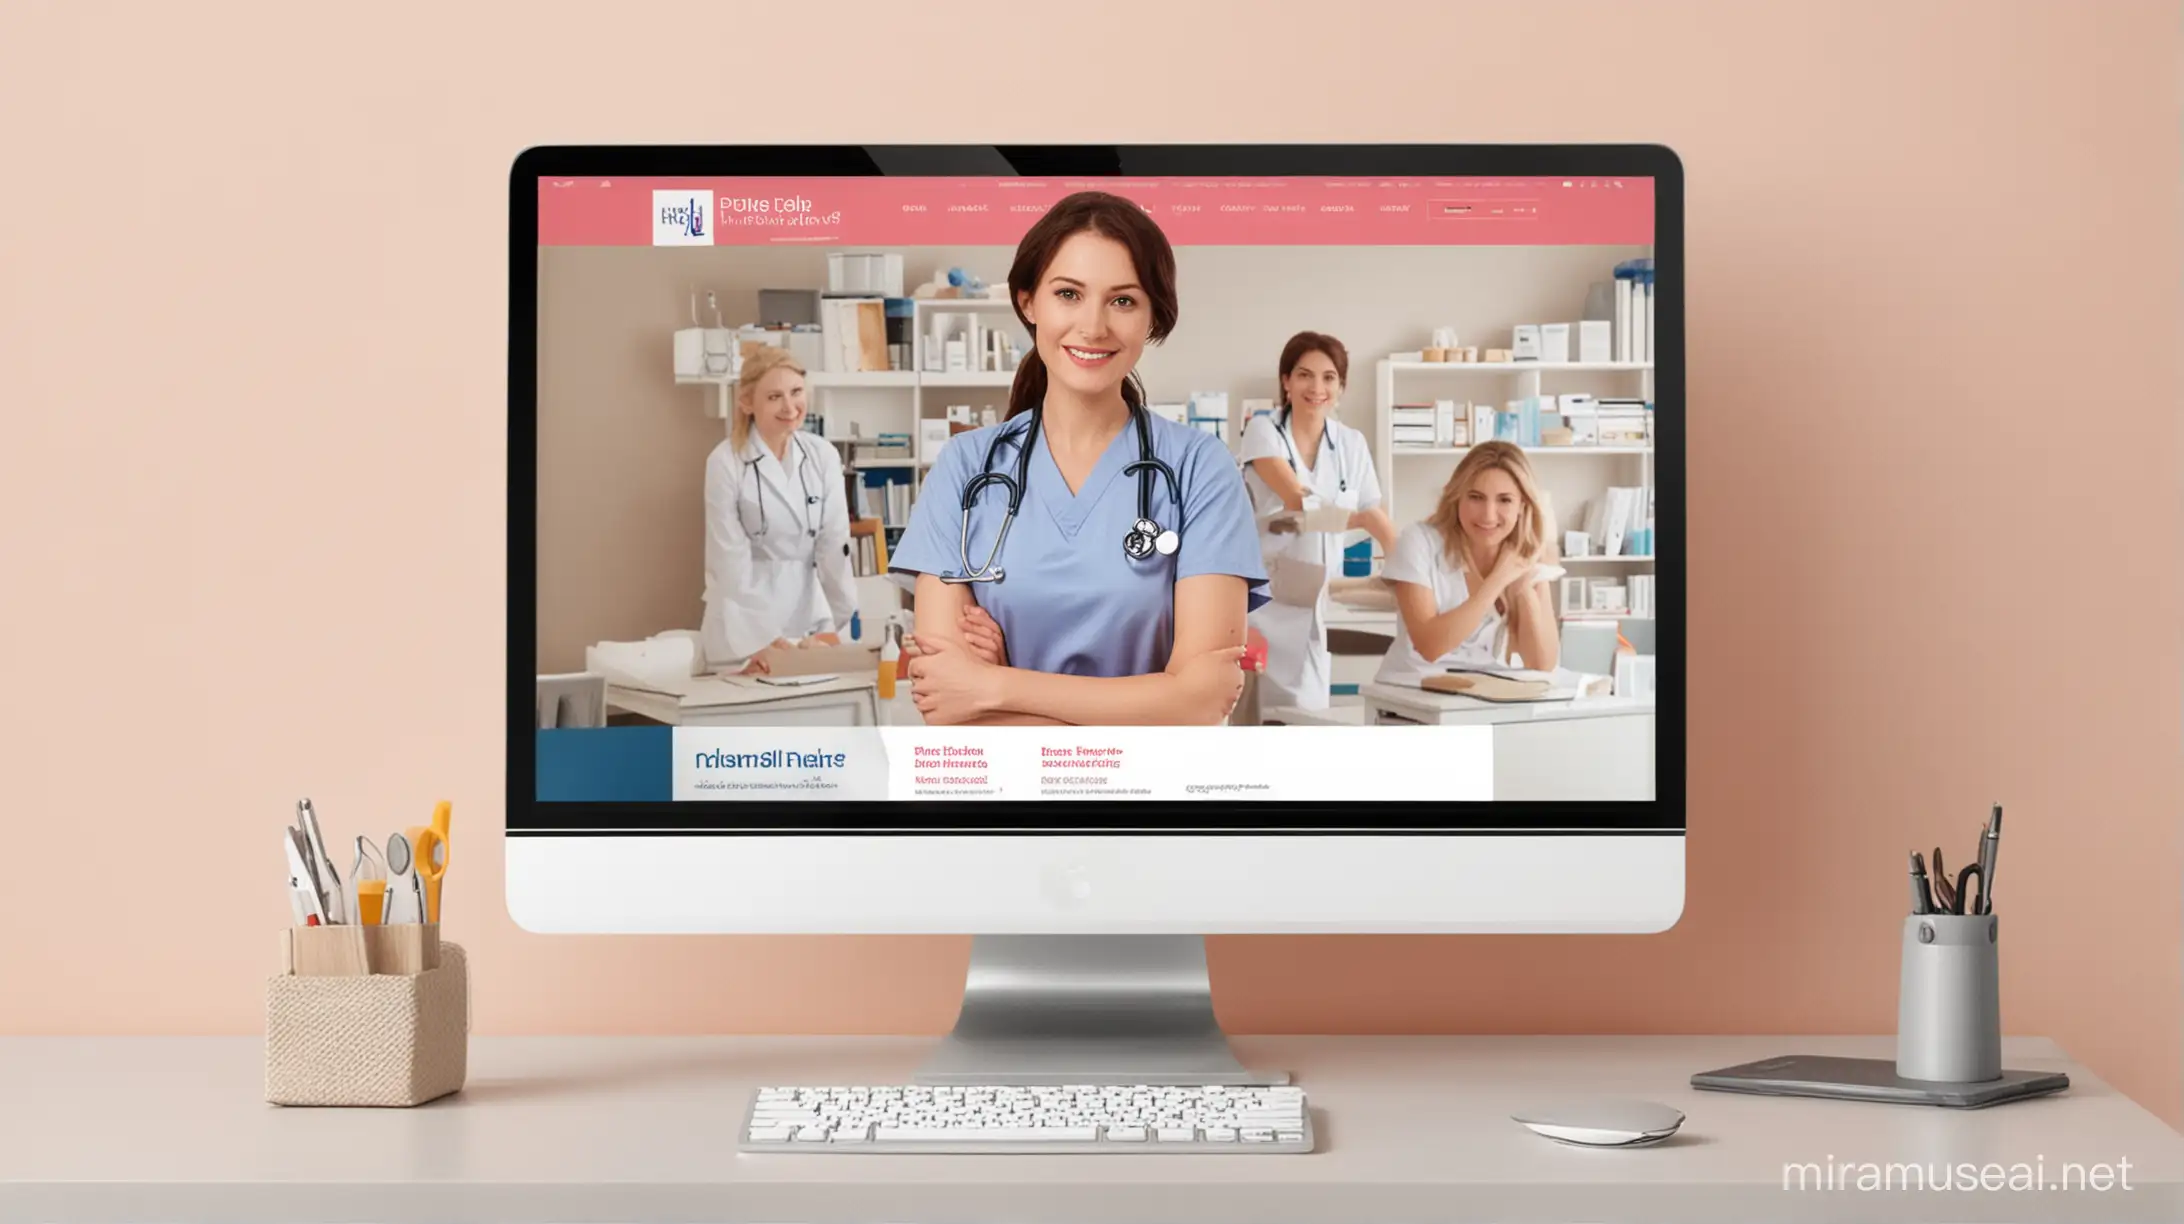 Create a website banner for Nurse Niche for POD where Recommended size: Min-Width 1500px / Height 200-300px